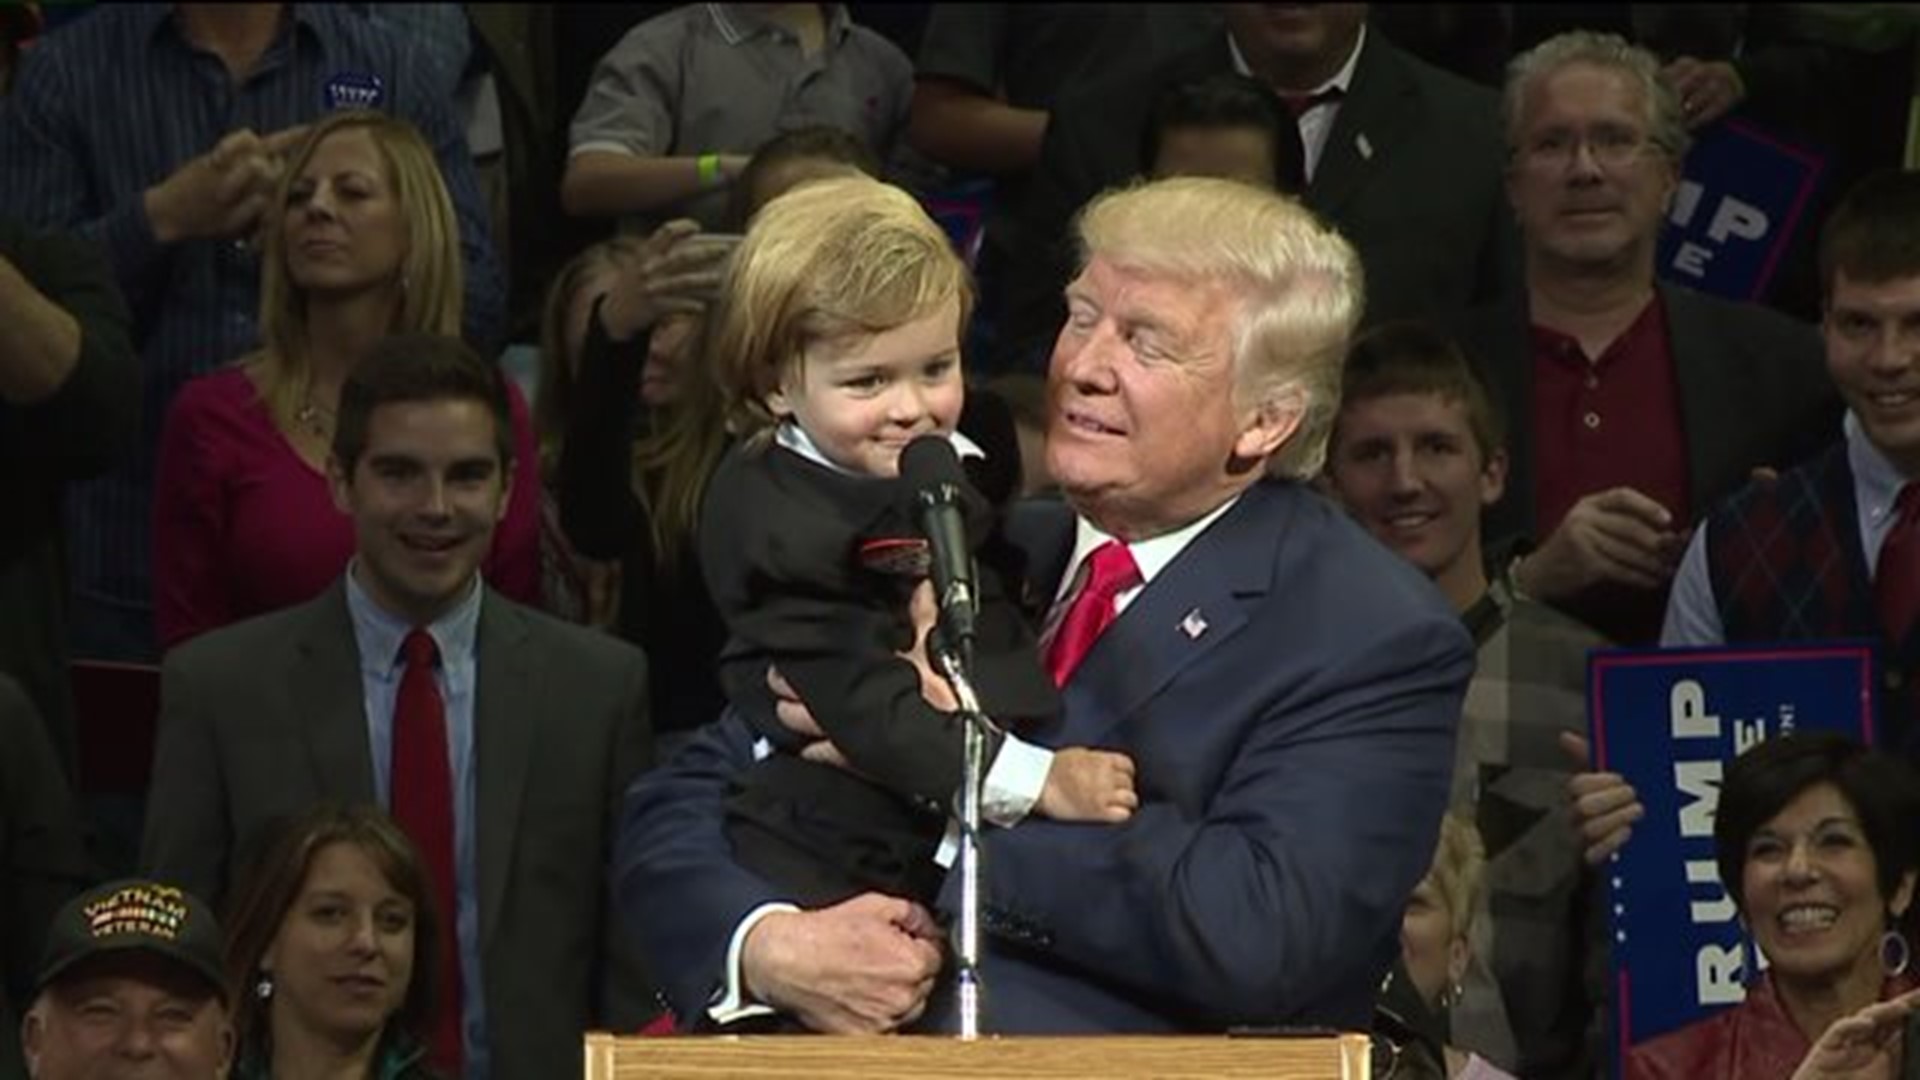 Trump Pulls 'Mini Trump' on Stage During Rally, Crowd Goes Wild